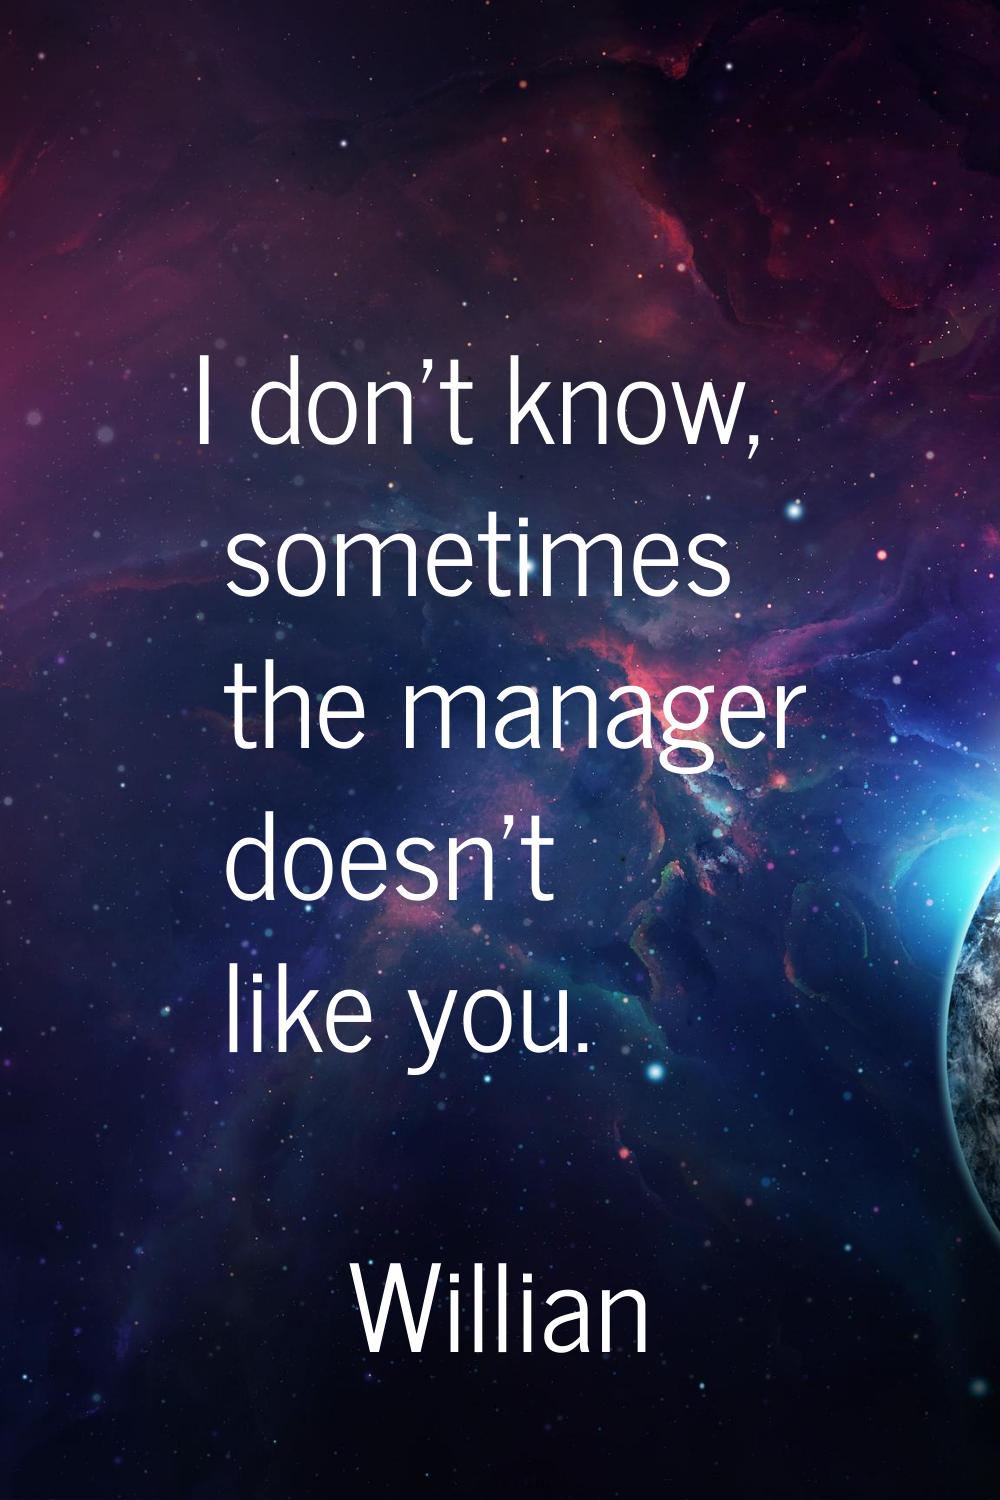 I don't know, sometimes the manager doesn't like you.